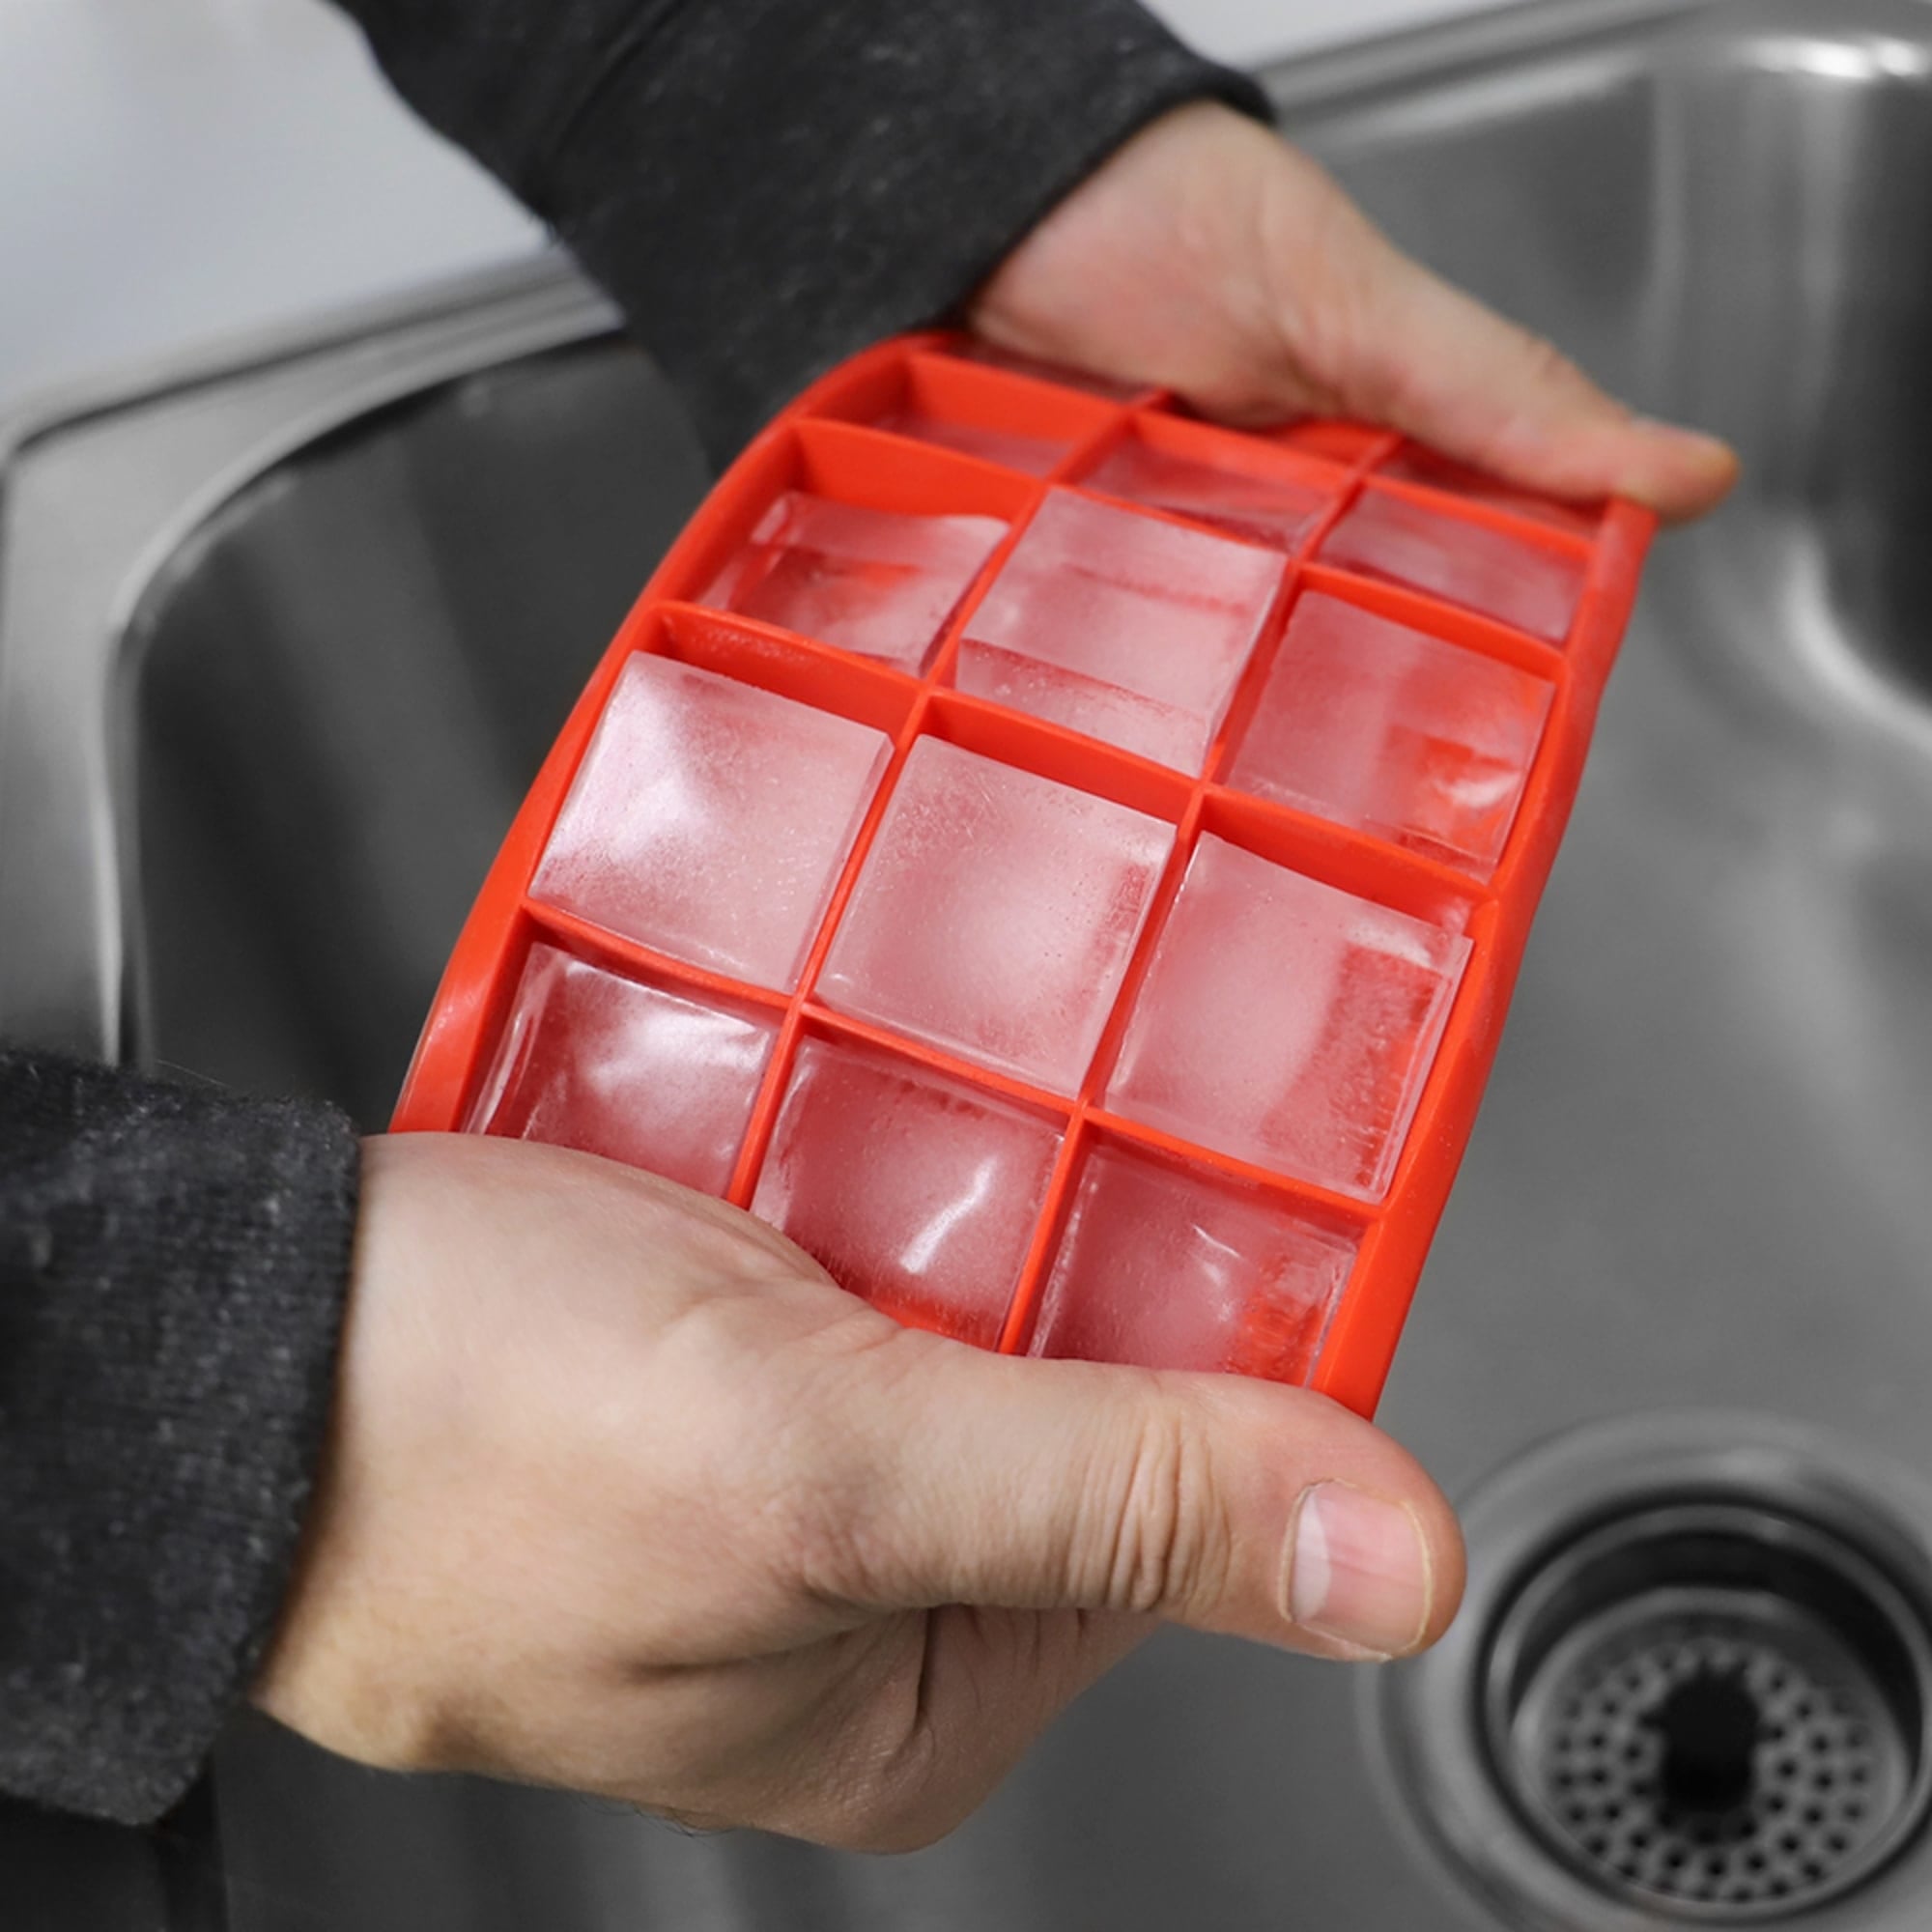 Home Basics Silicone Ice Cube Tray $3.00 EACH, CASE PACK OF 48